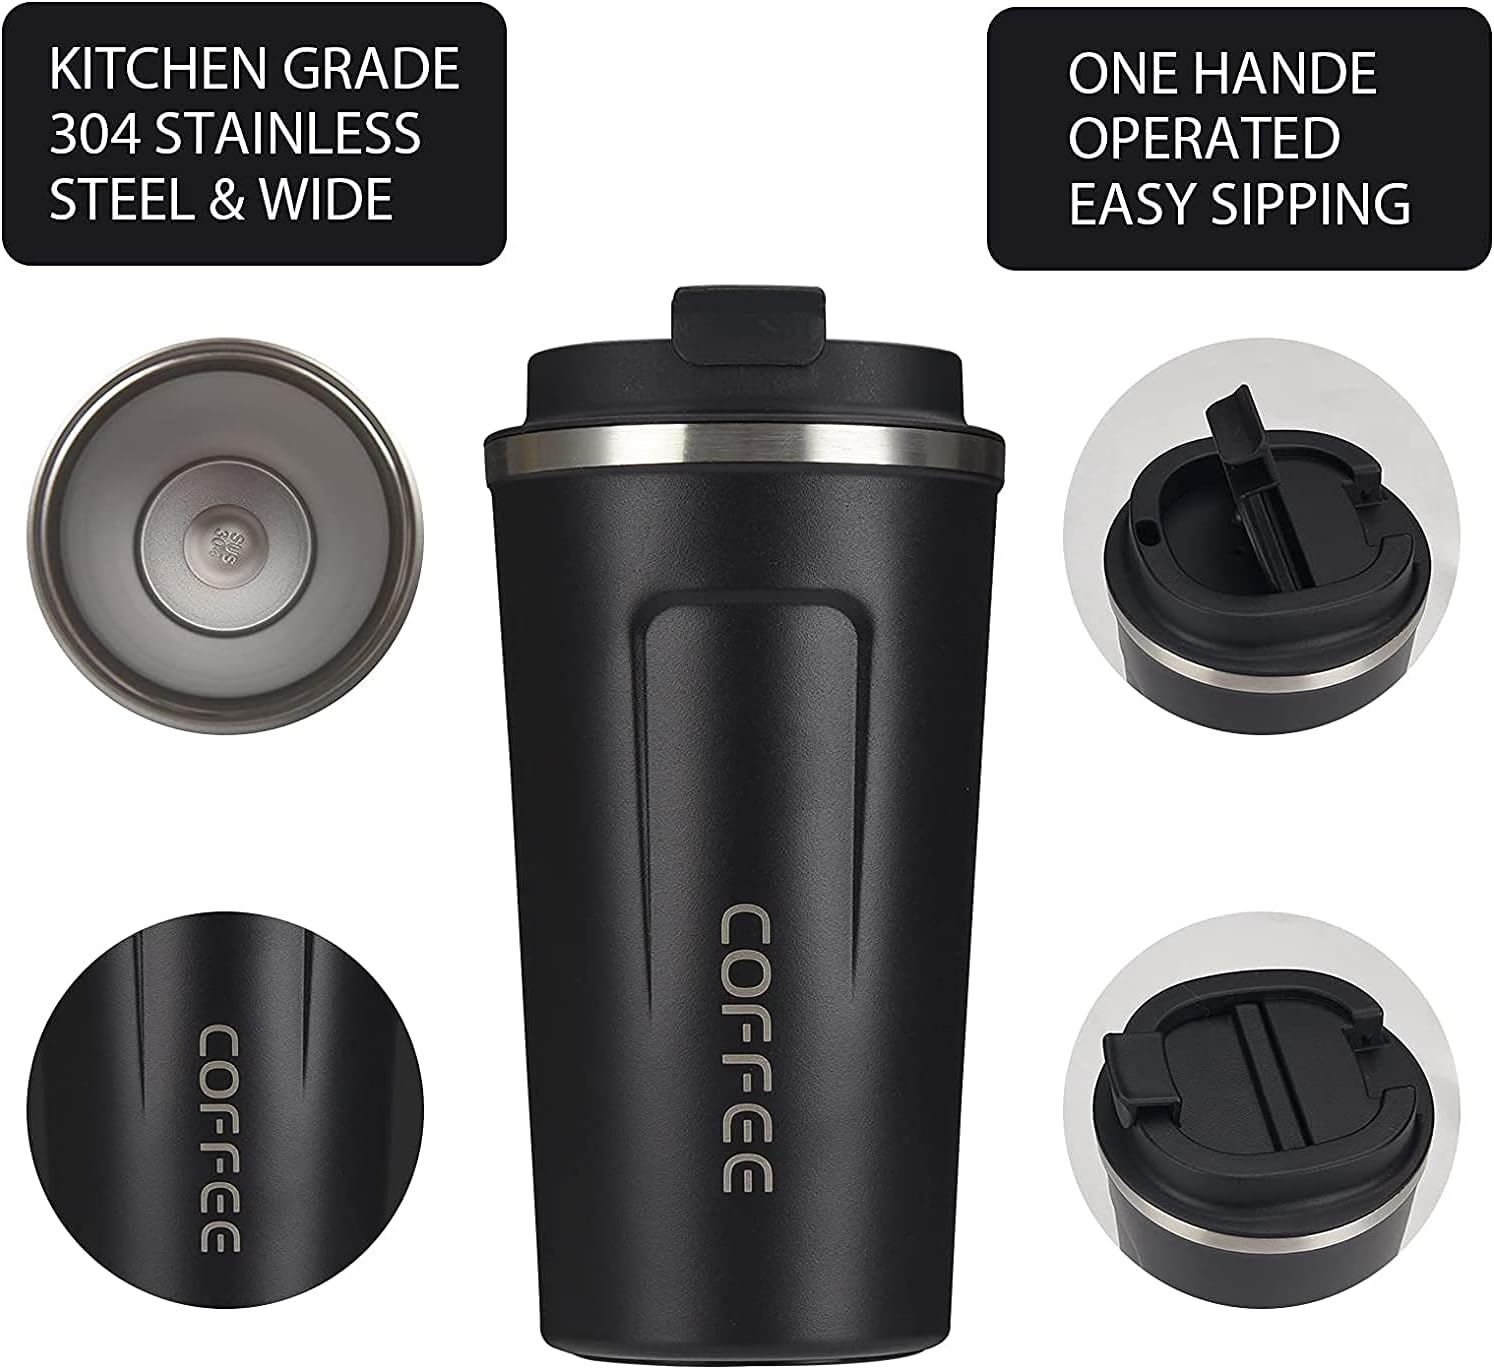 Insulated Thermo Mug Stainless Steel Leakproof Travel Mug Coffee Cup